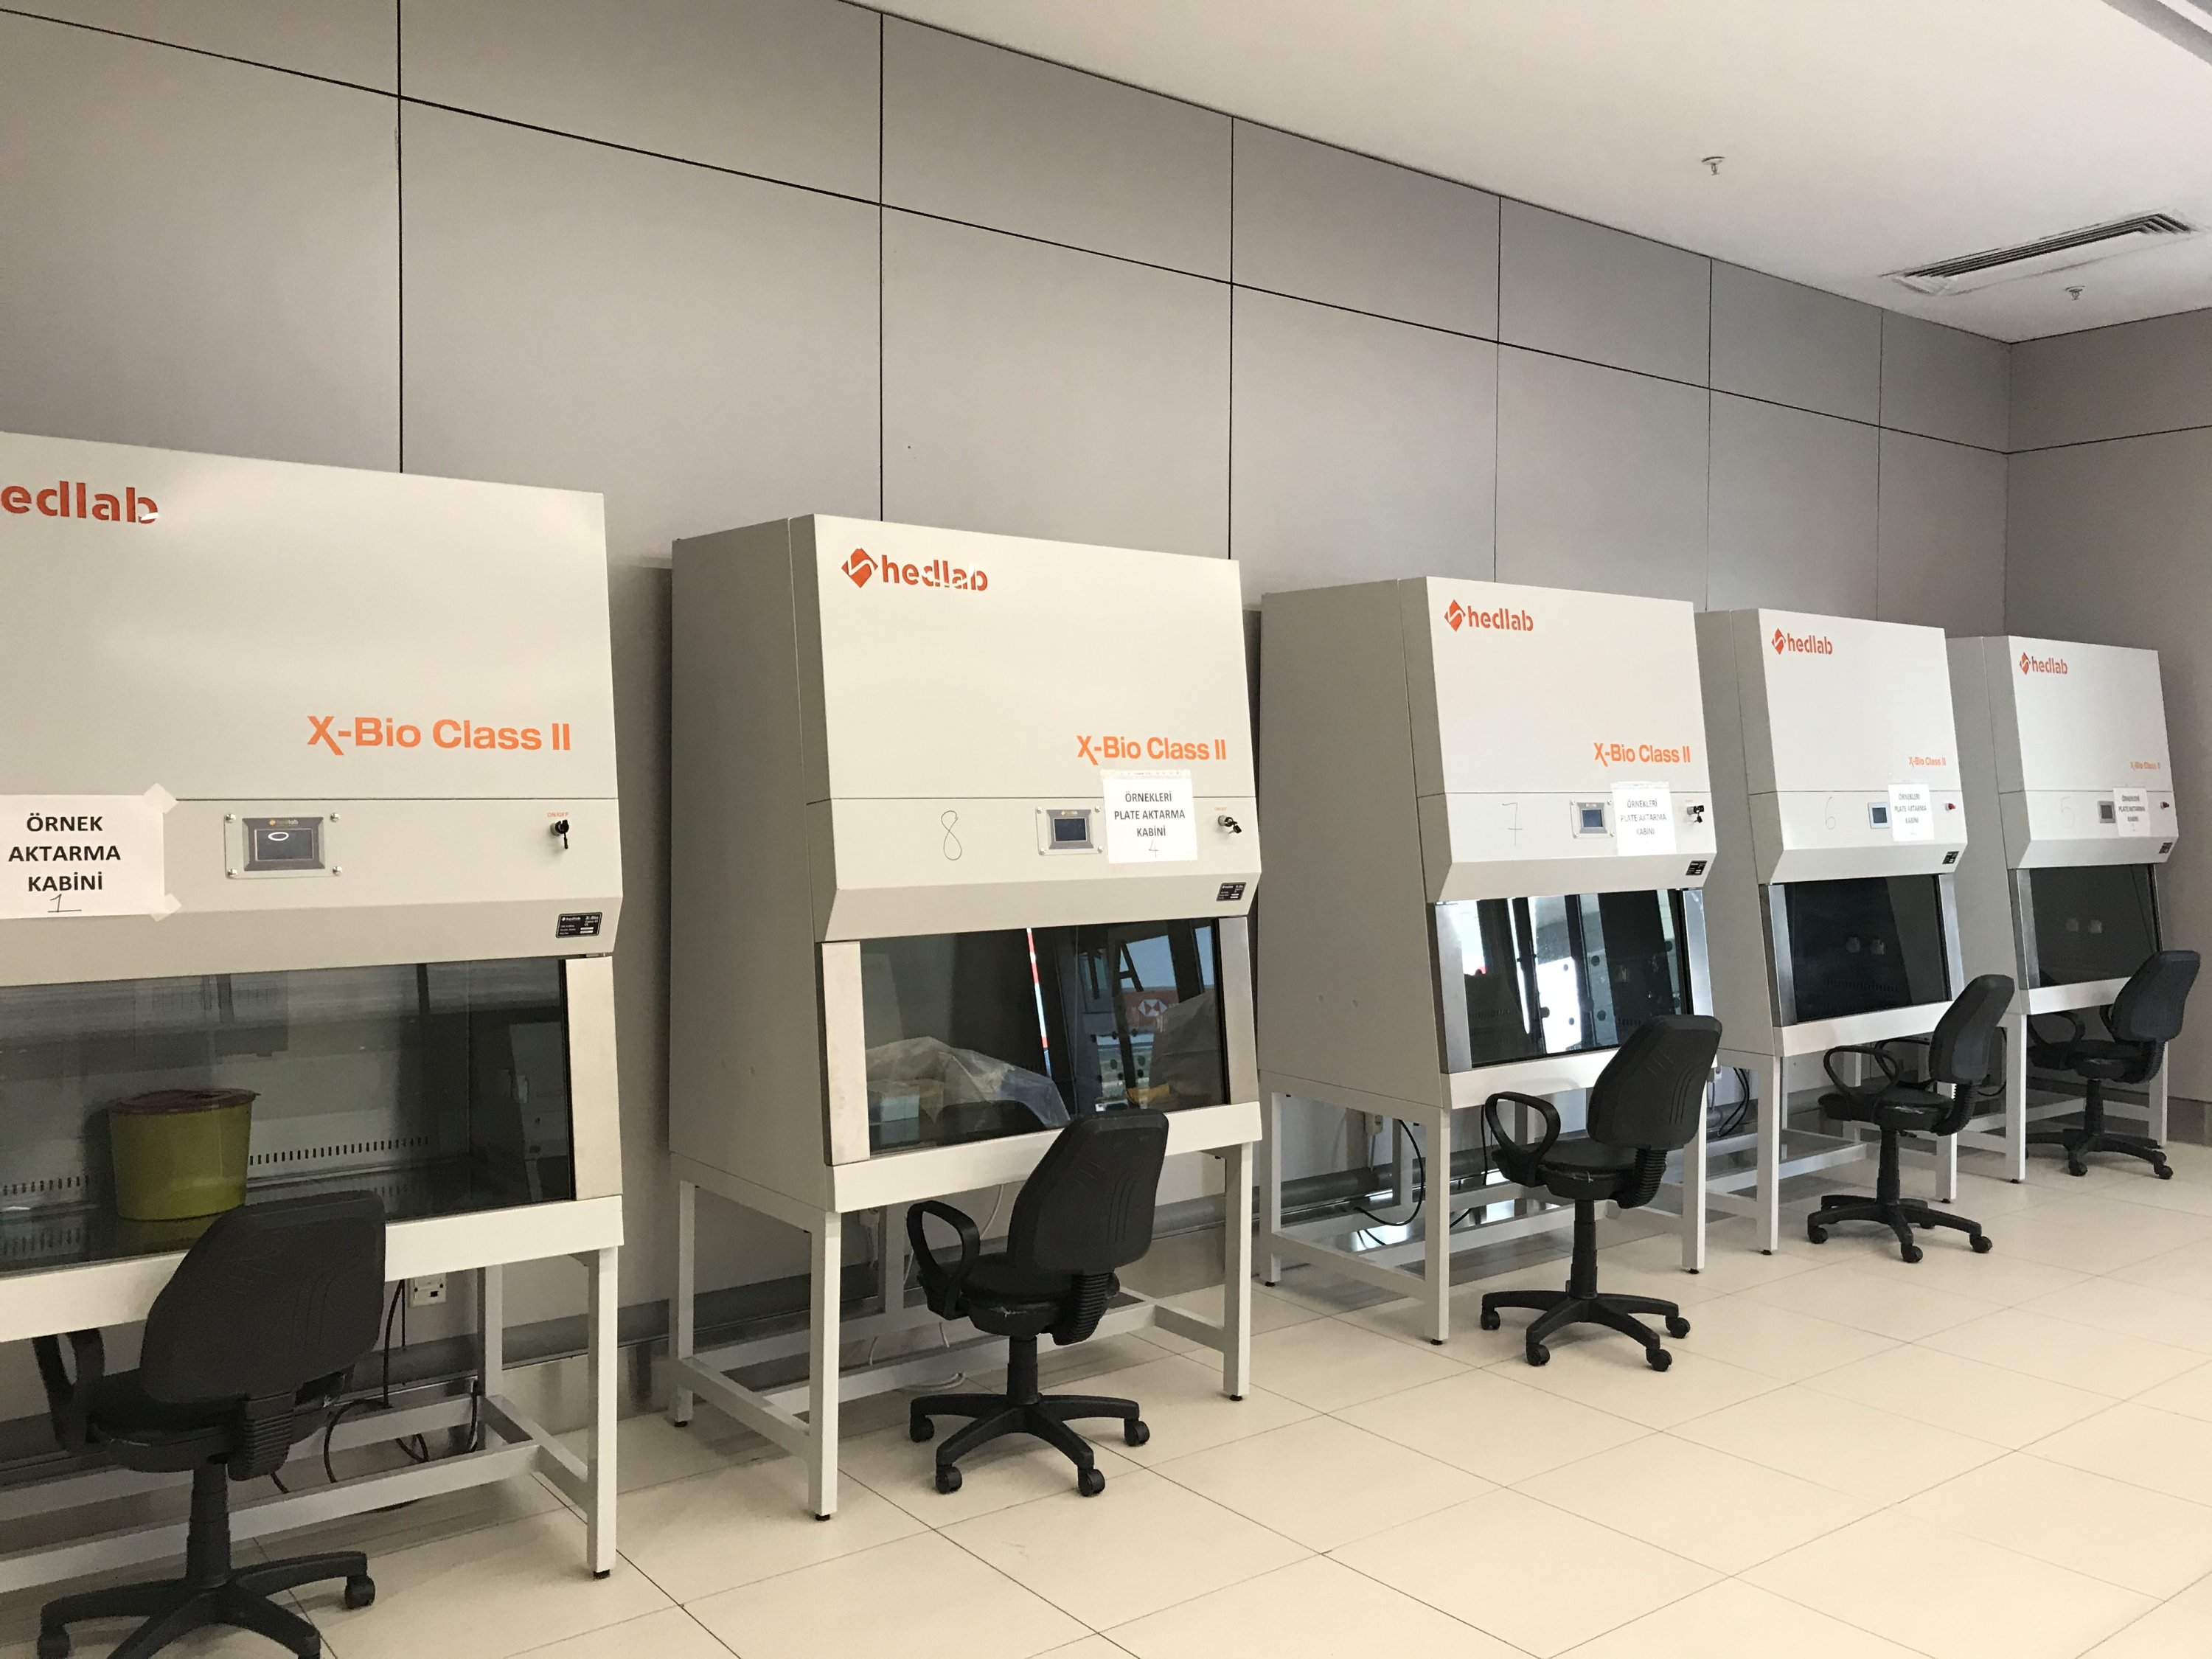 covid 19 testing center established at istanbul airport daily sabah